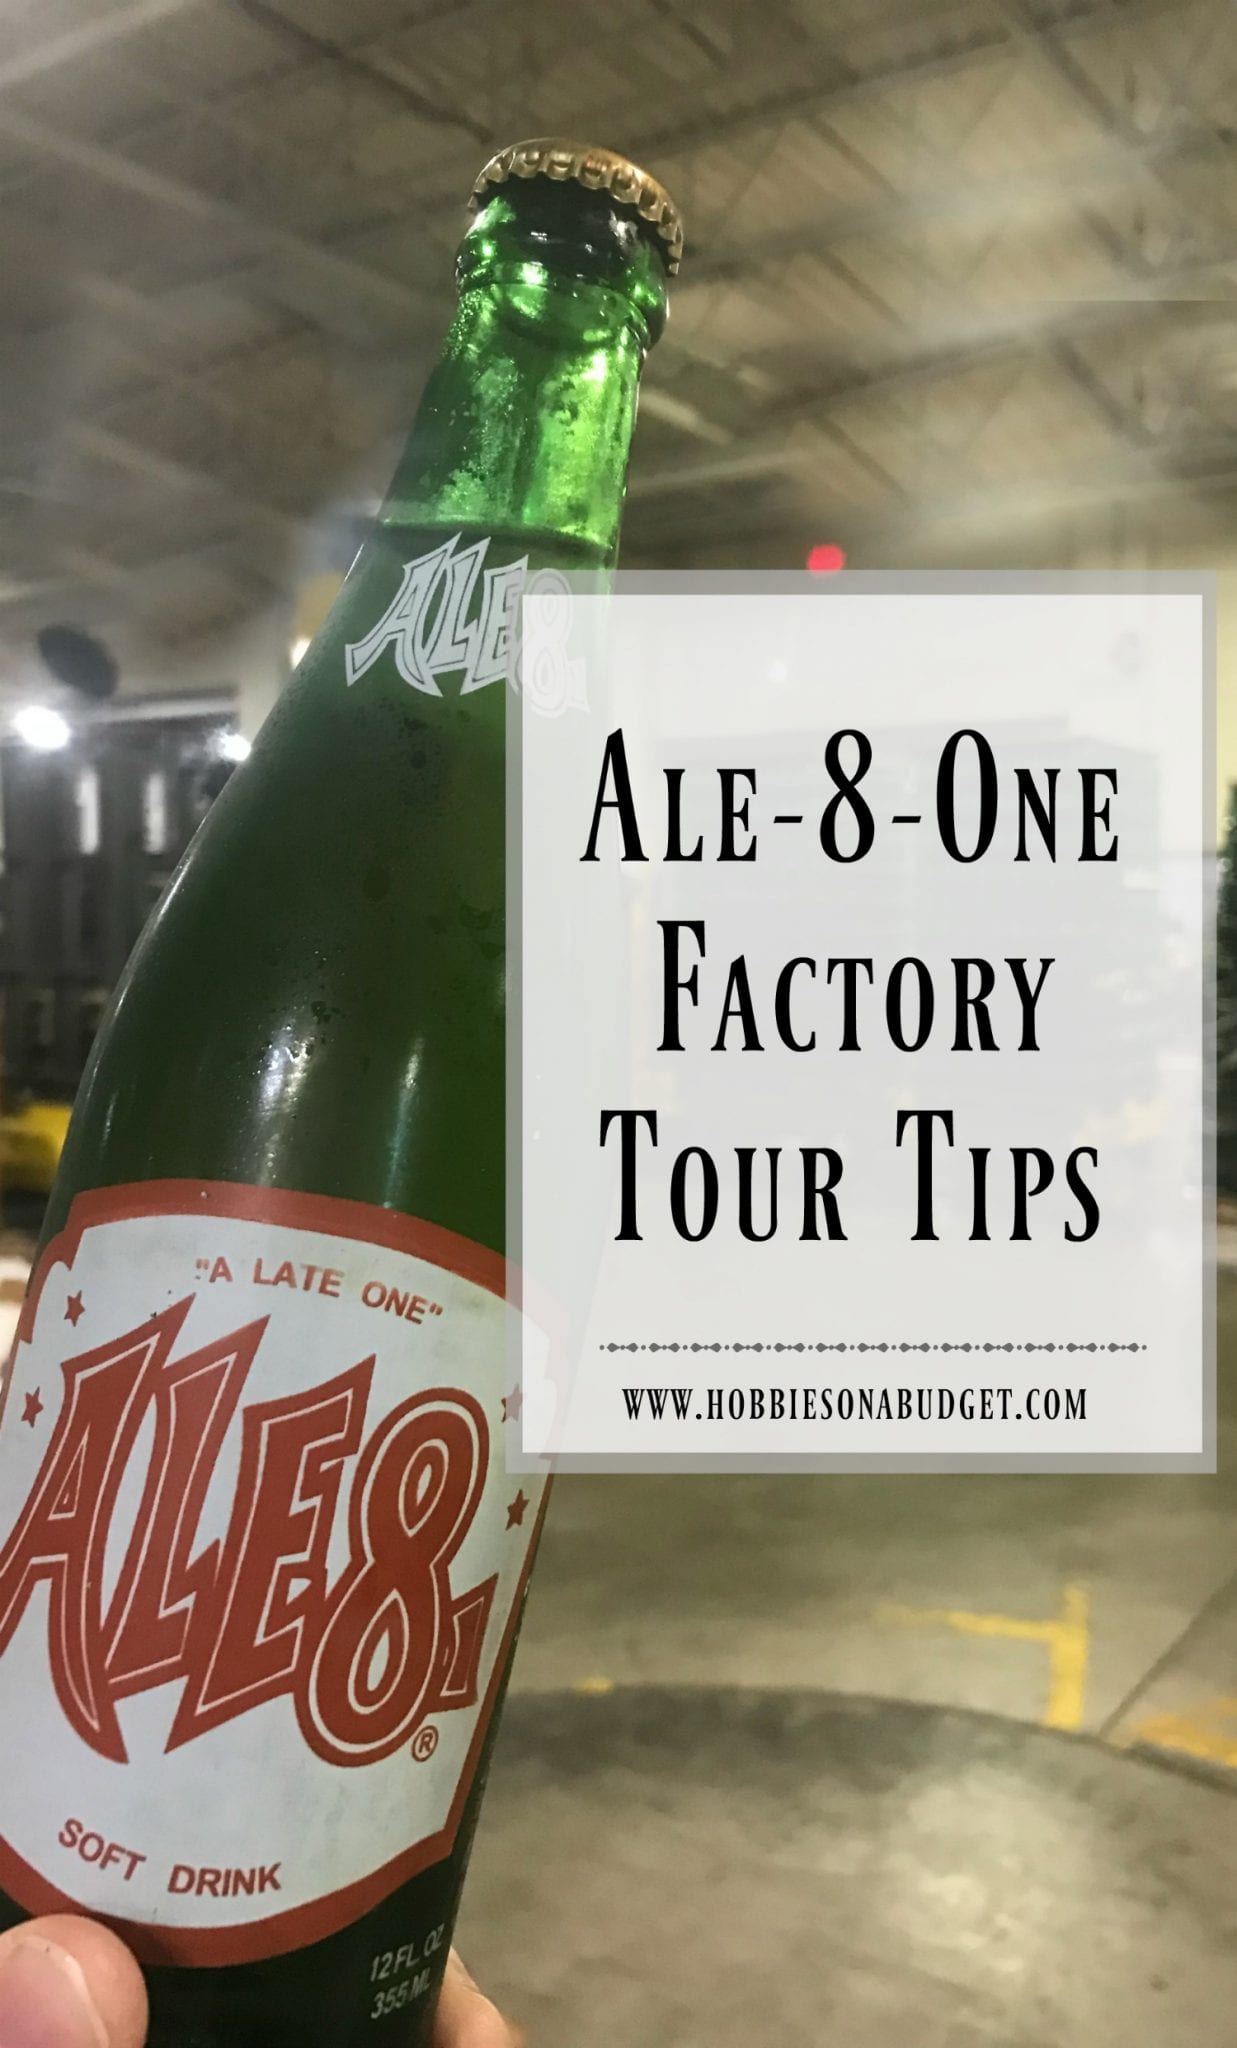 Ale-8-One Factory Tour Tips